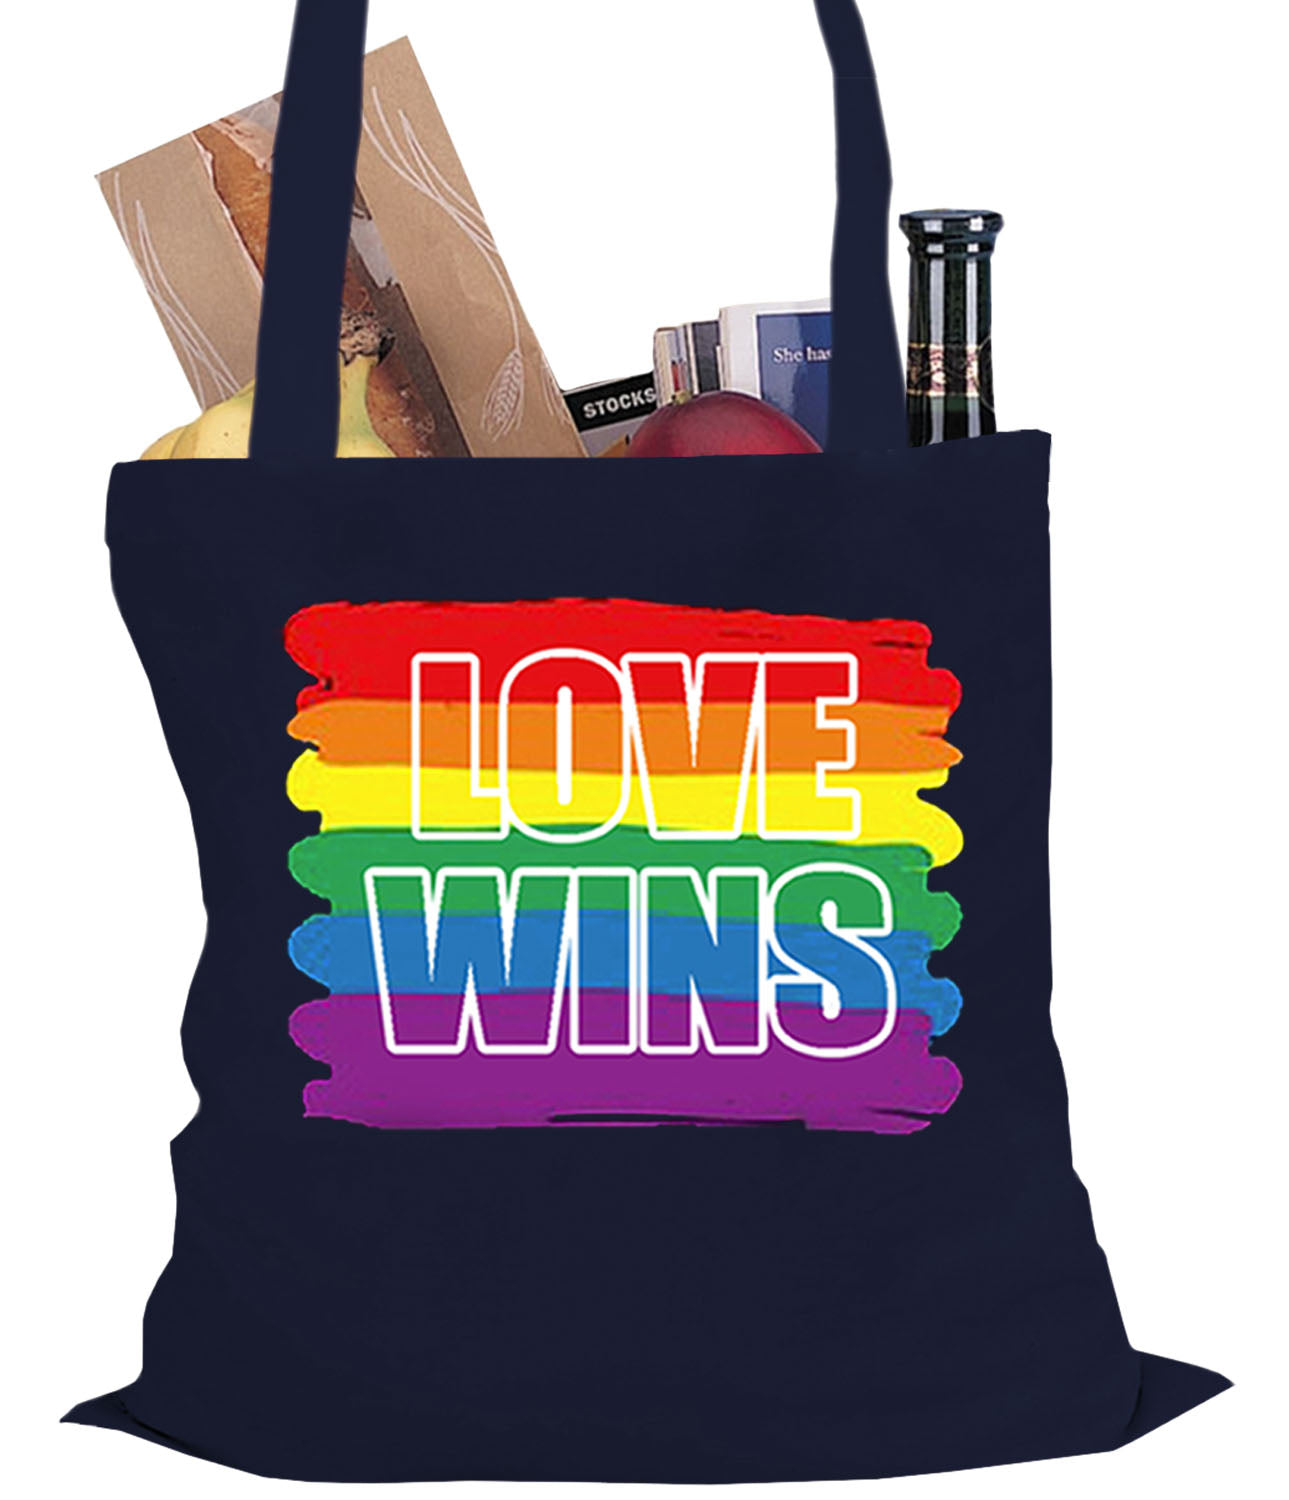 Rainbow Love Wins Gay Marriage Equality Tote Bag